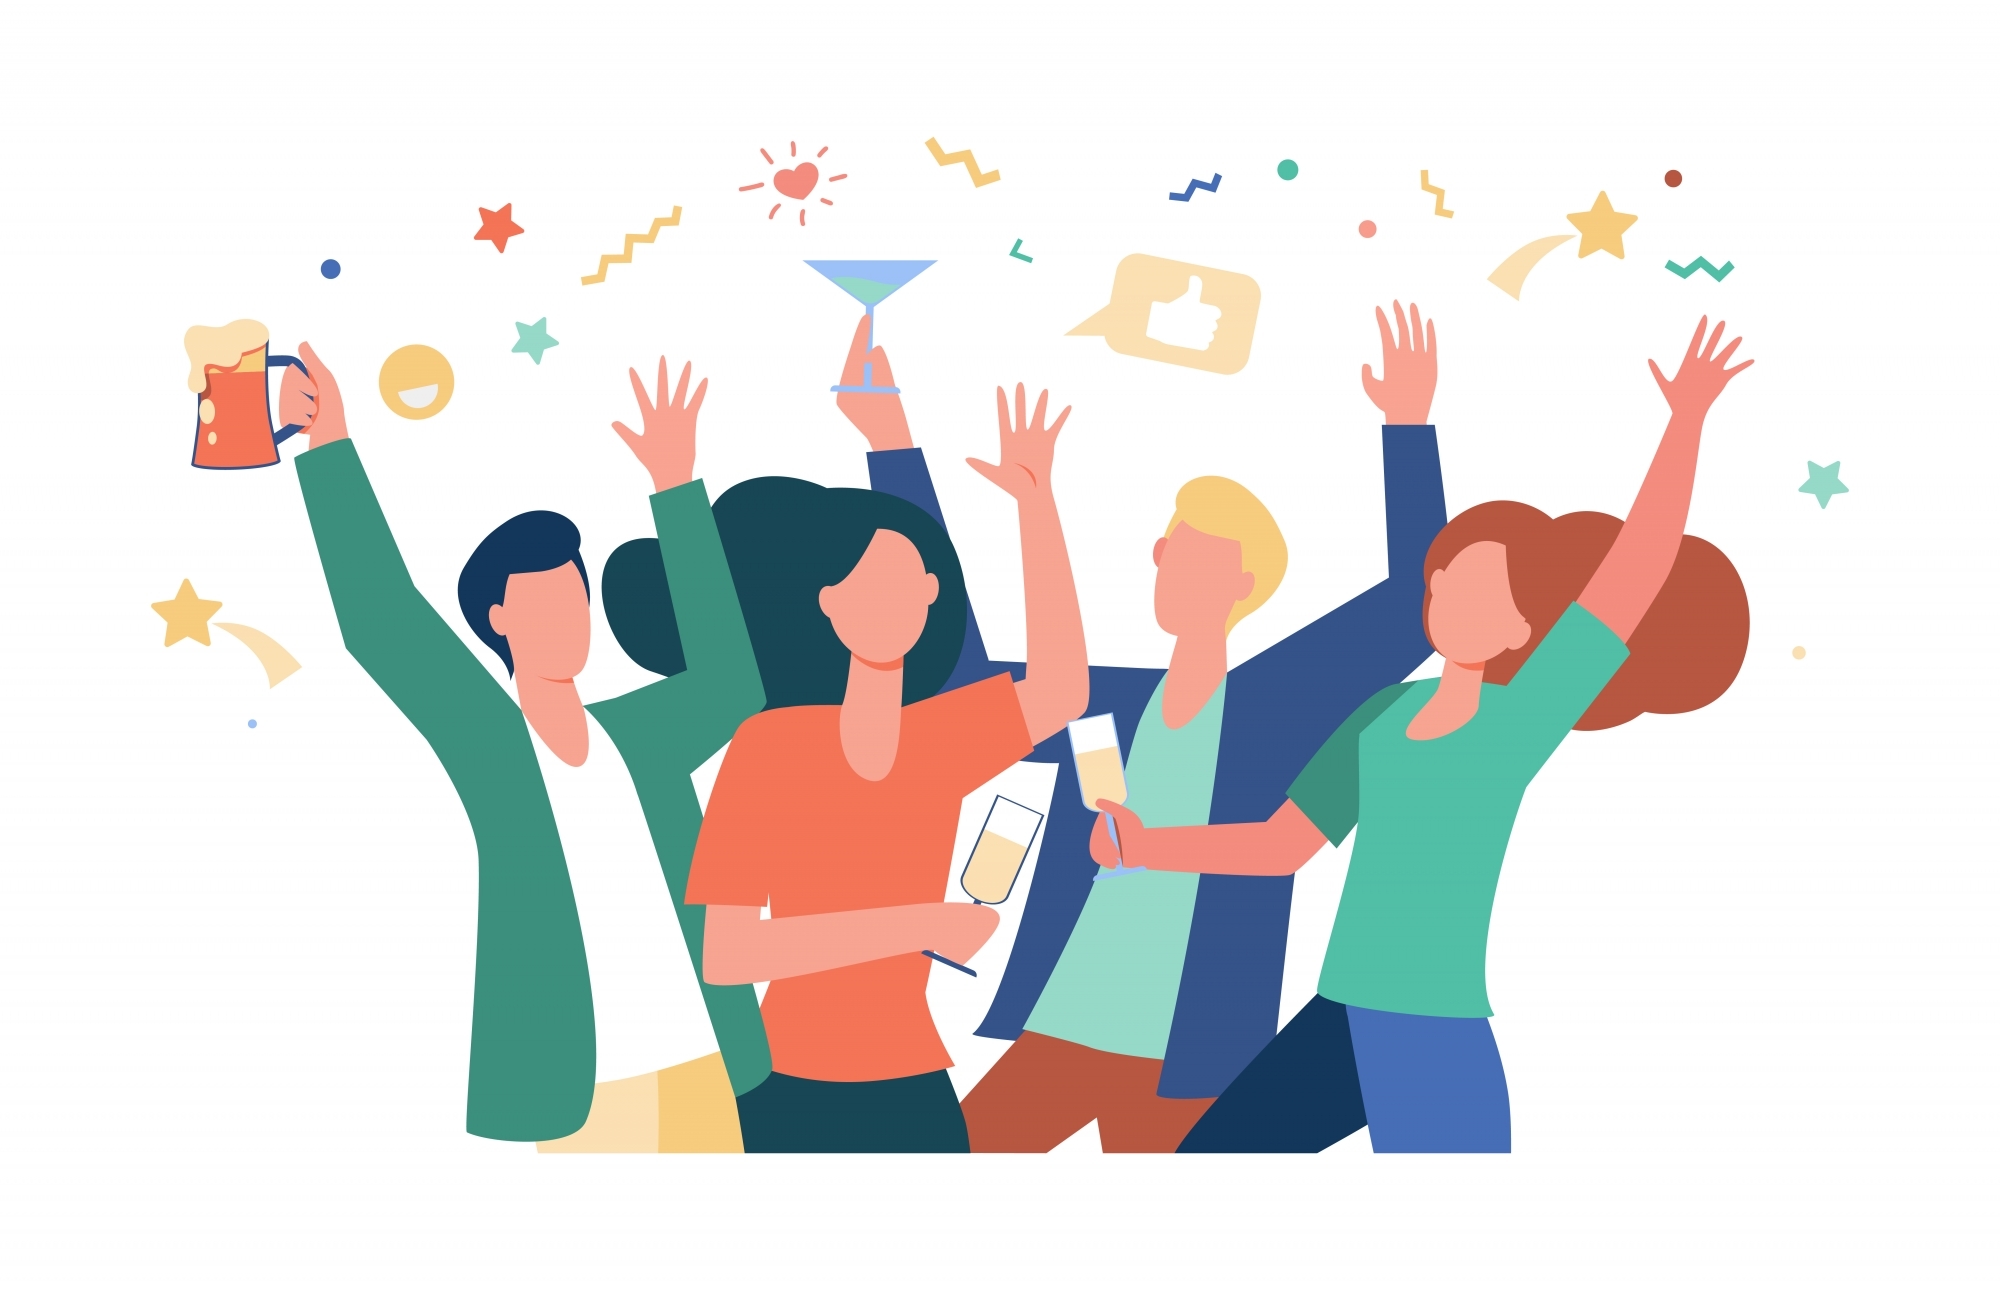 Happy friends celebrating event together. Croup of people enjoying party, dancing, drinking alcohol. Vector illustration for friendship, leisure time, having fun concept